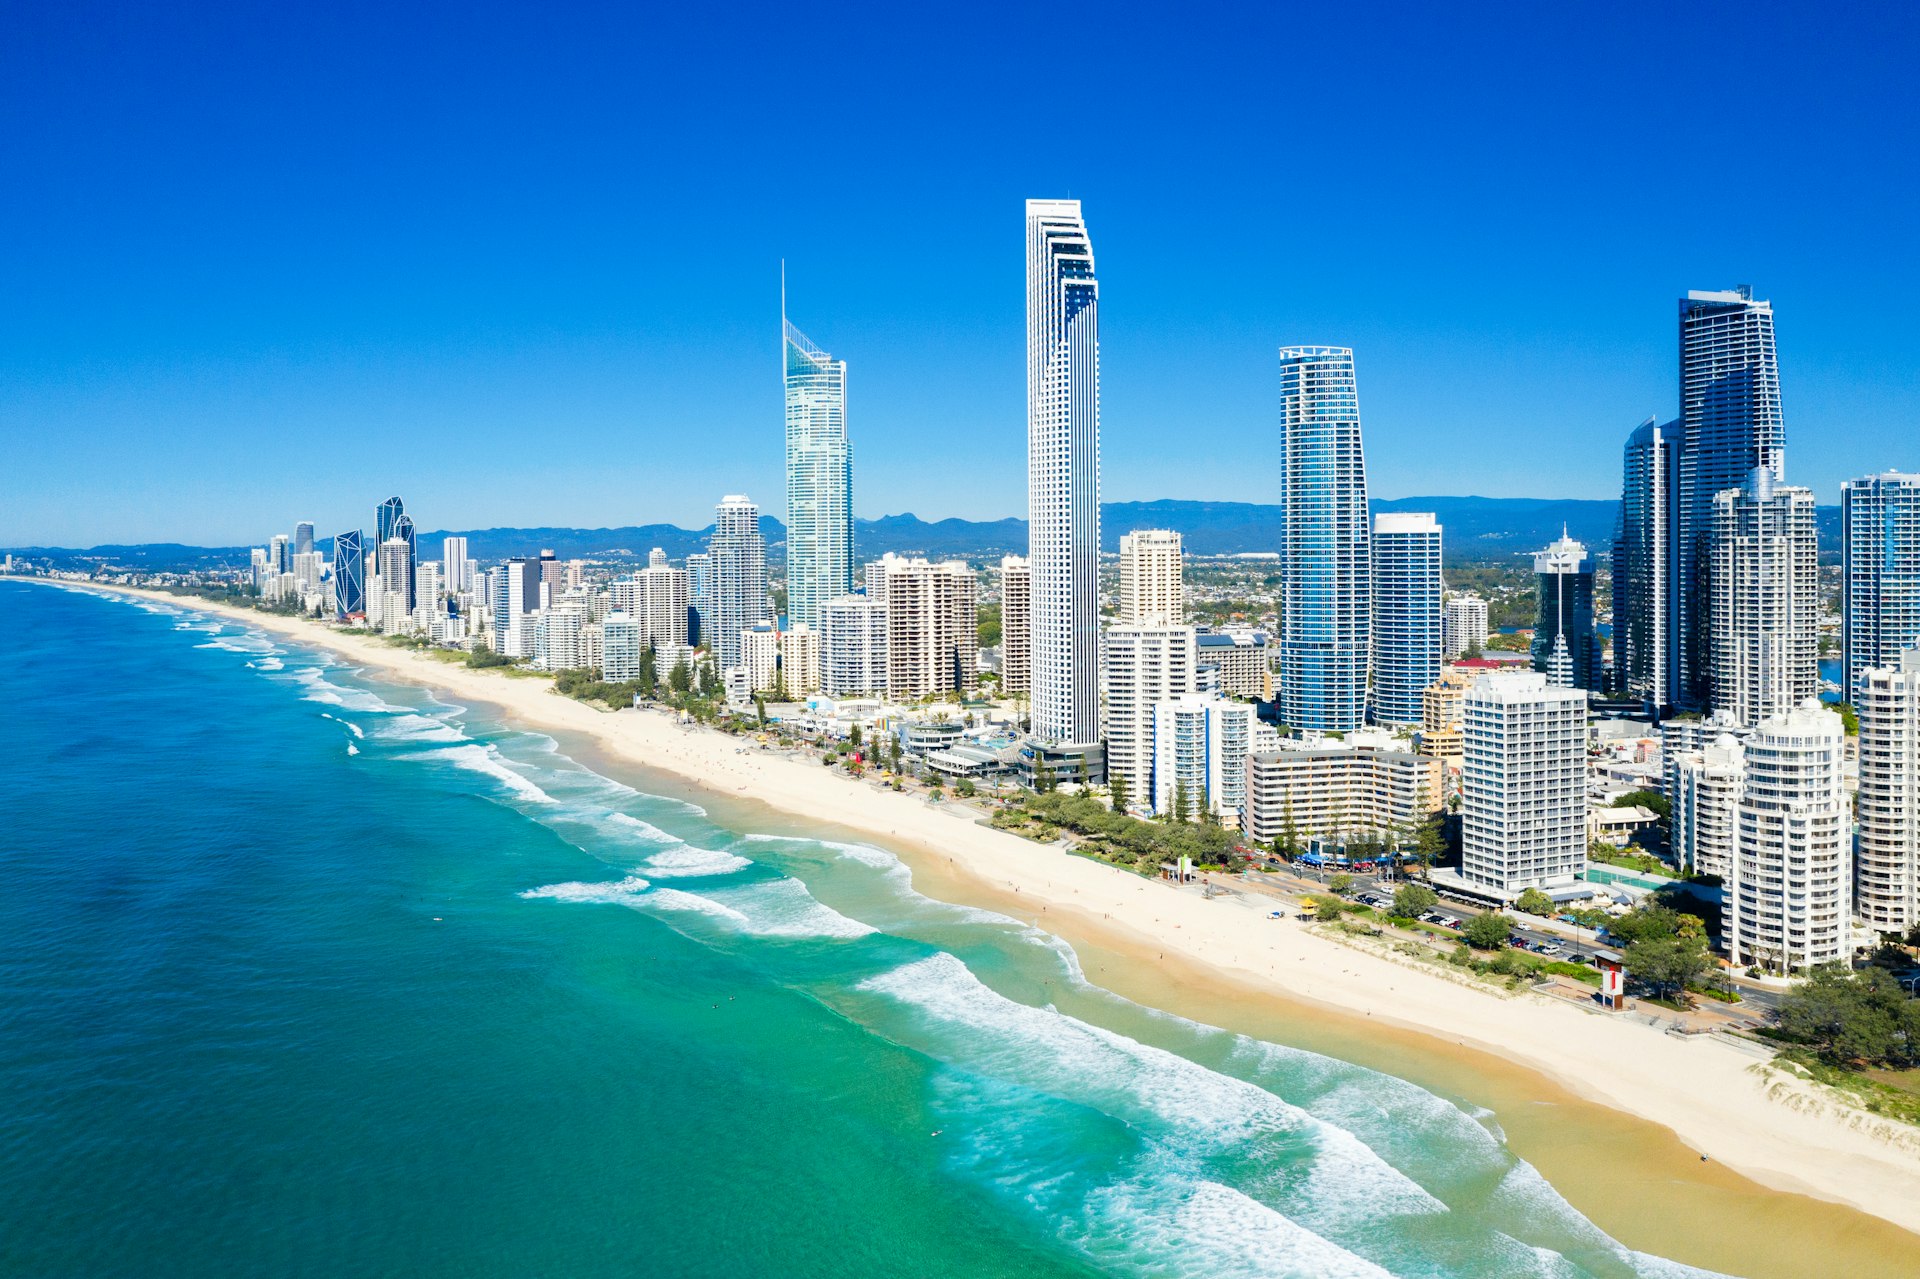 An aerial view of the sunny coast of surfers paradise with skyscrapers backing on to beaches